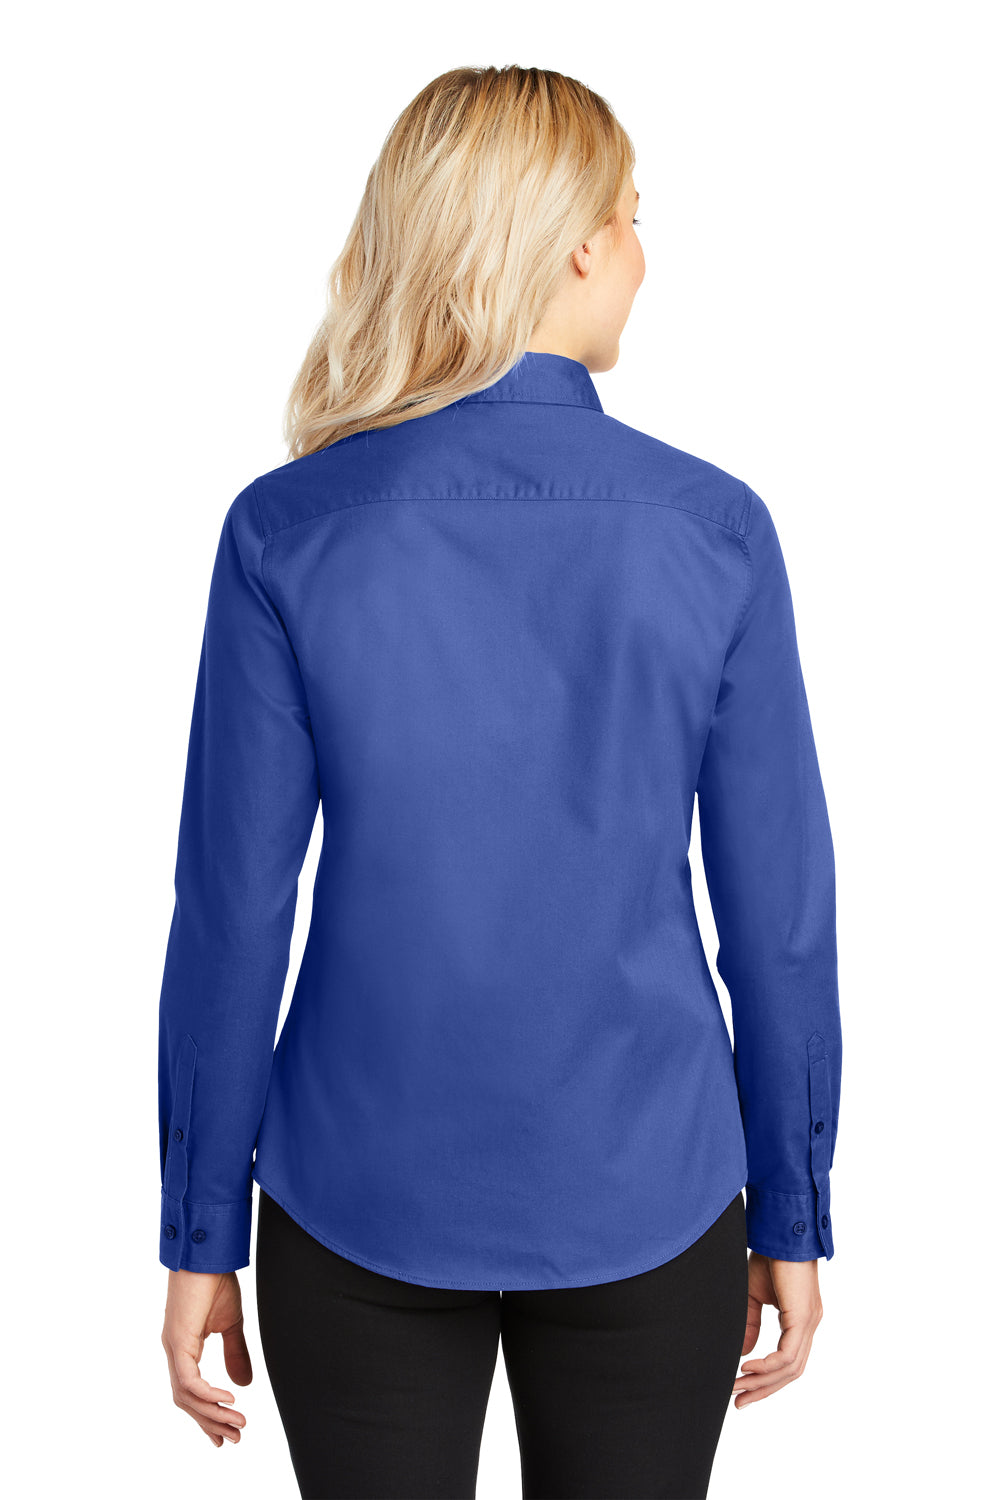 Port Authority L608 Womens Easy Care Wrinkle Resistant Long Sleeve Button Down Shirt Royal Blue Back